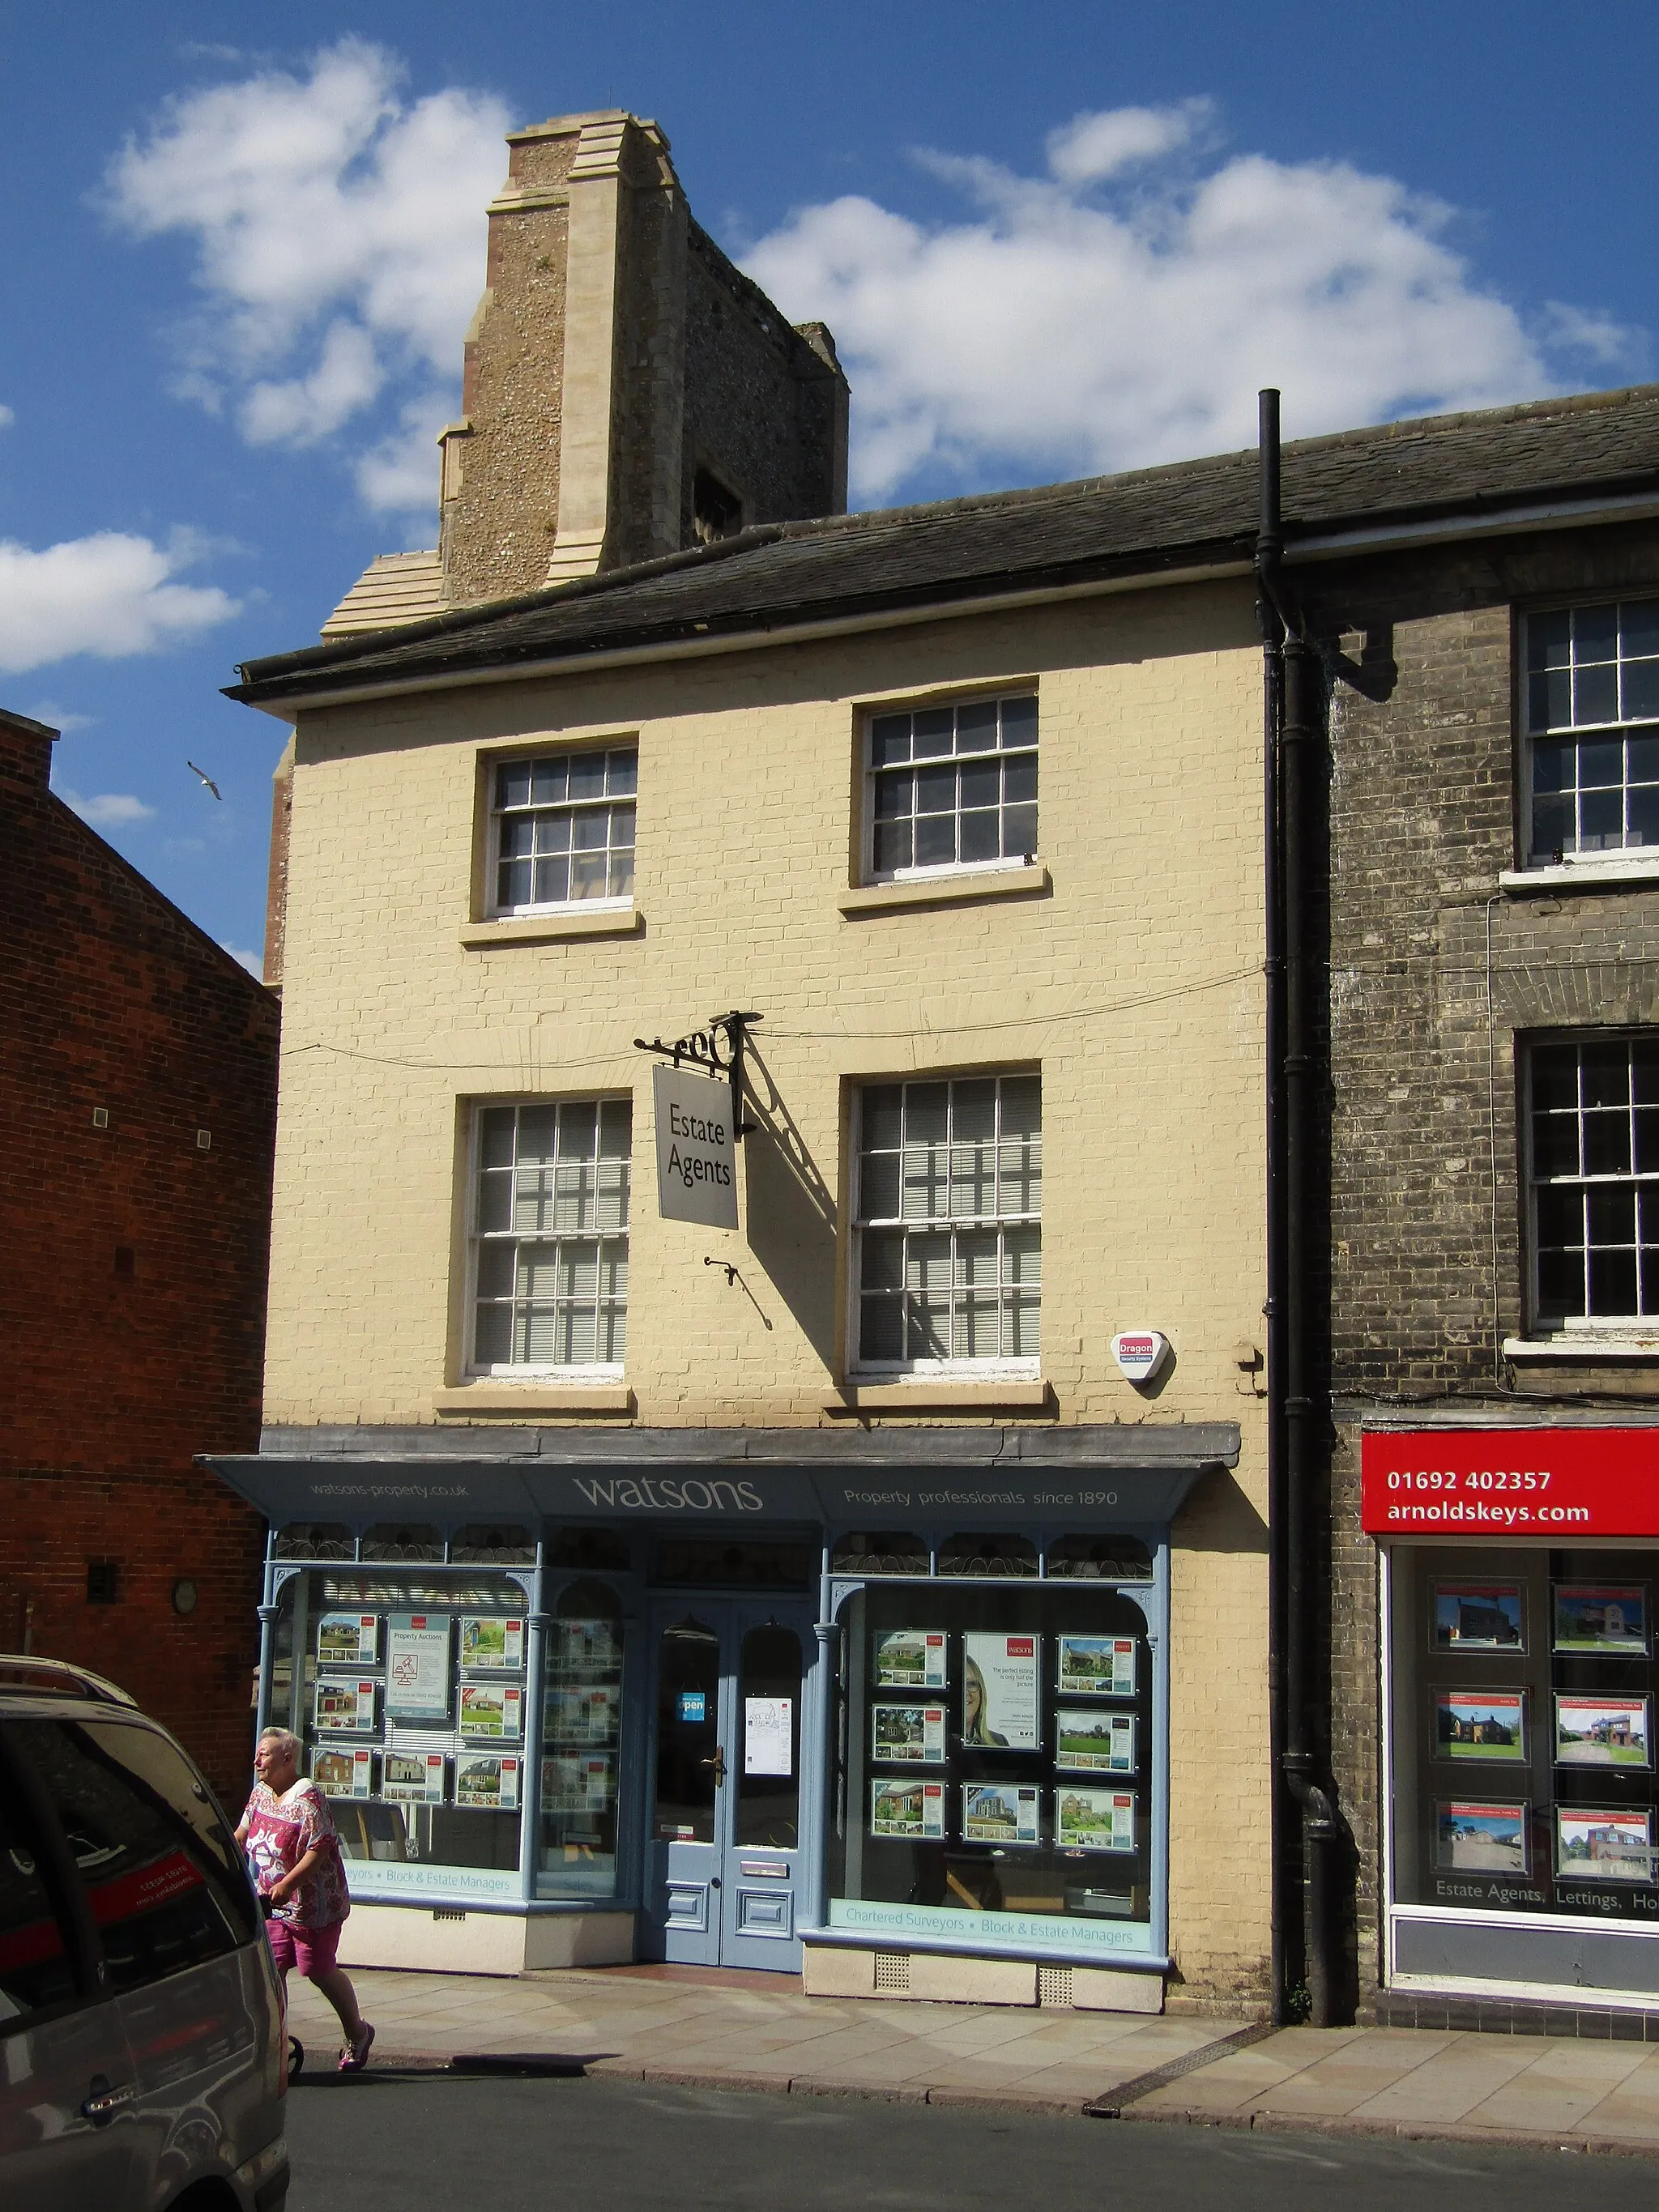 Photo showing: A branch of Watson's estate agents located on Market Place within the town of North Walsham, Norfolk, United Kingdom.